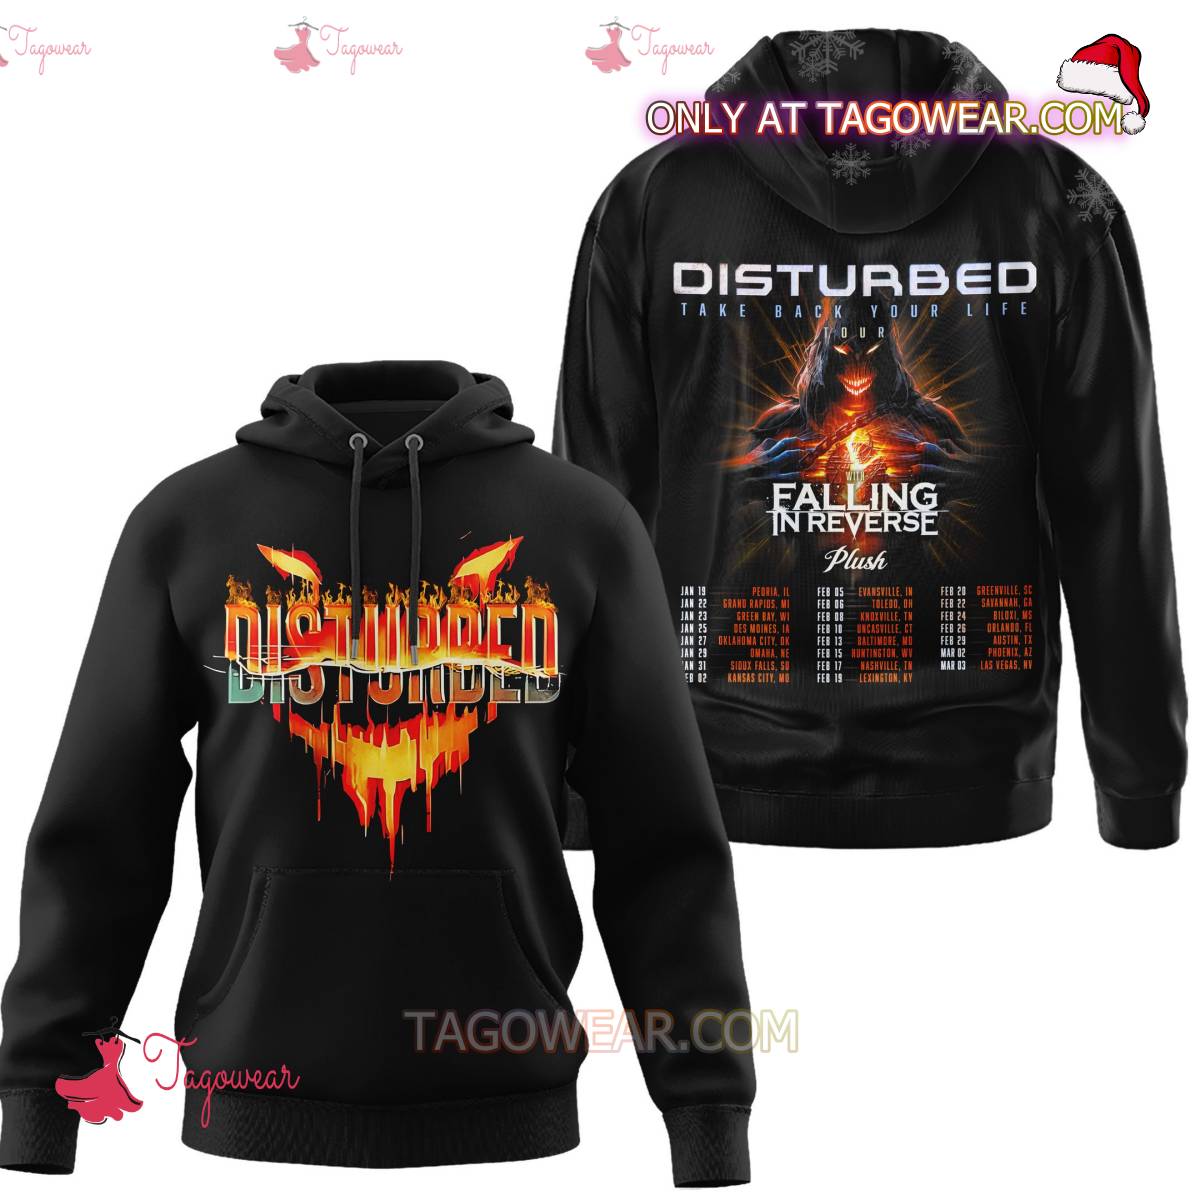 Disturbed Take Back Your Life Tour With Falling In Reverse T-shirt, Hoodie x